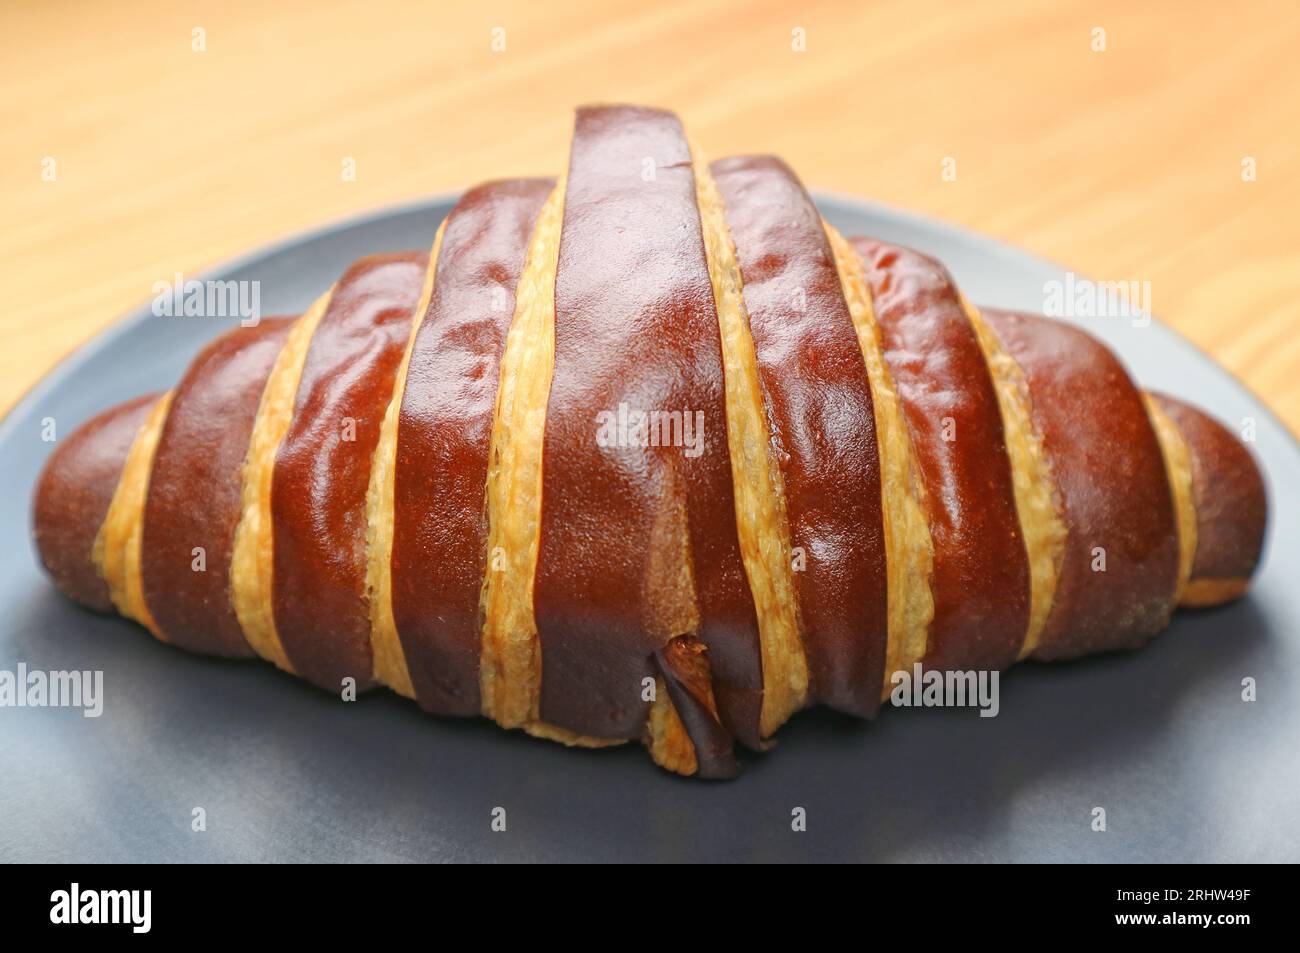 Closeup of a Delectable Bicolored Chocolate Croissant Served on Wooden Table Stock Photo